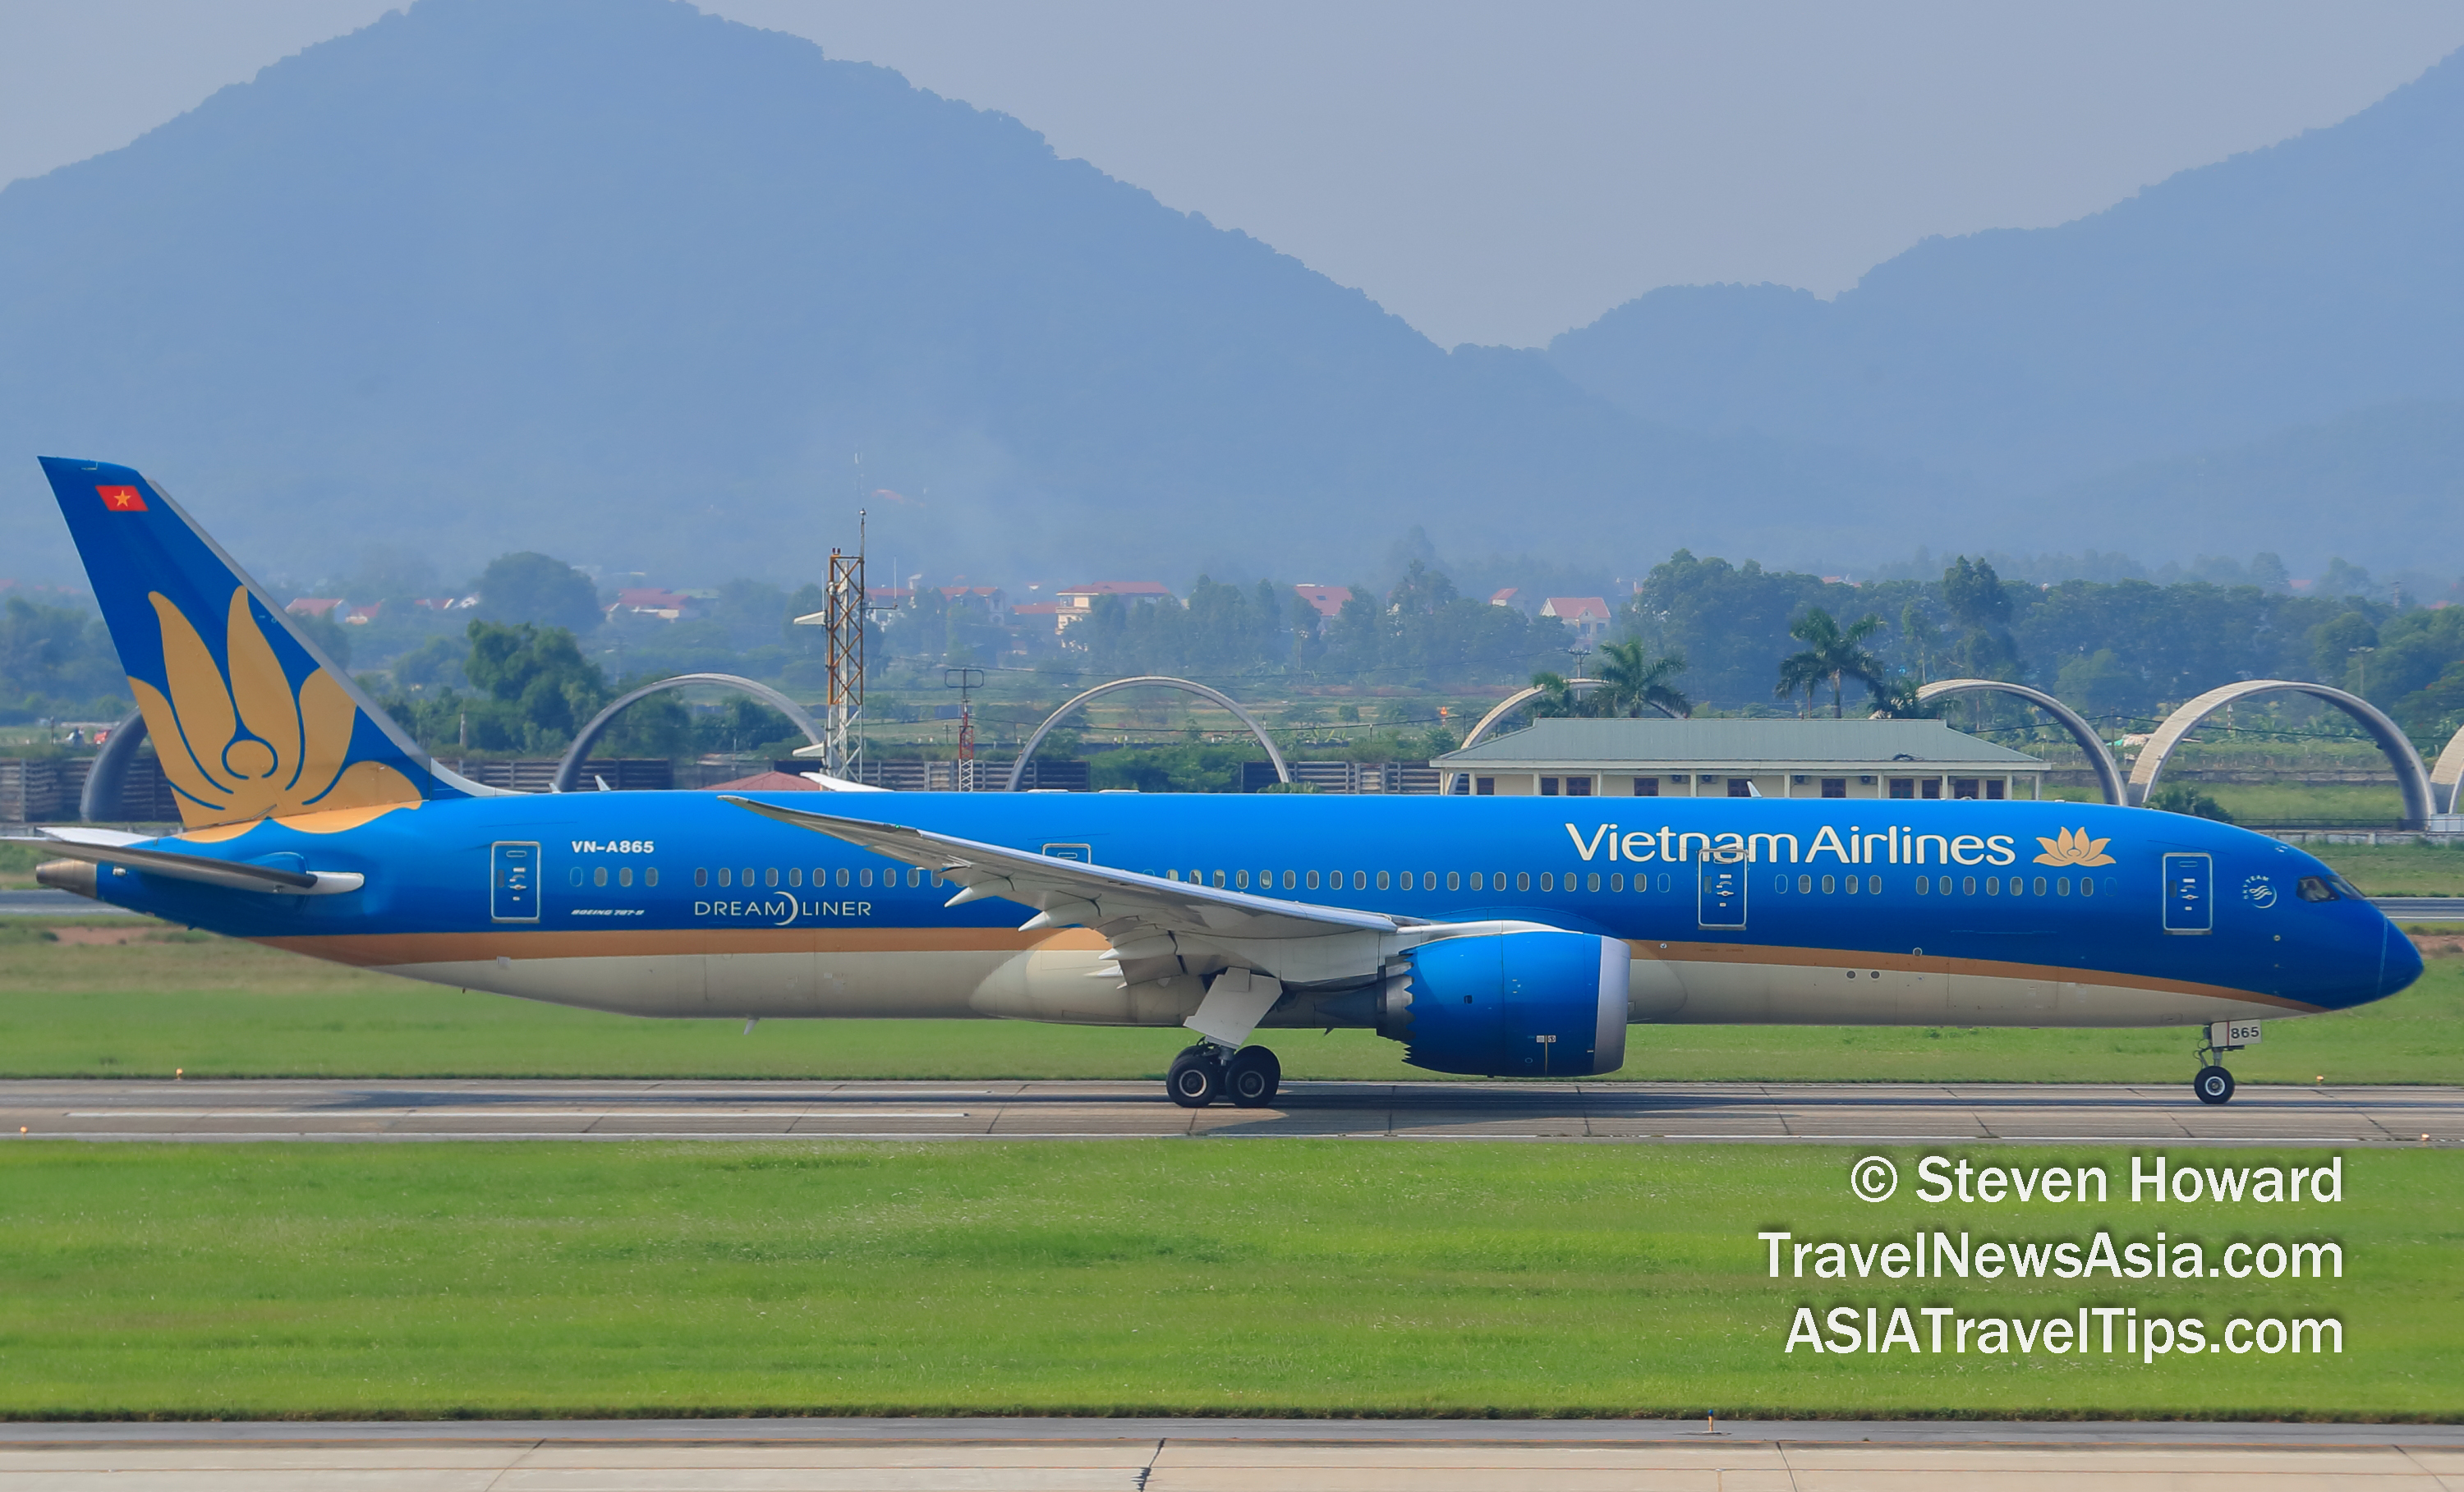 Vietnam Airlines Boeing 787-8 reg: VN-A865. Picture by Steven Howard of TravelNewsAsia.com Click to enlarge.